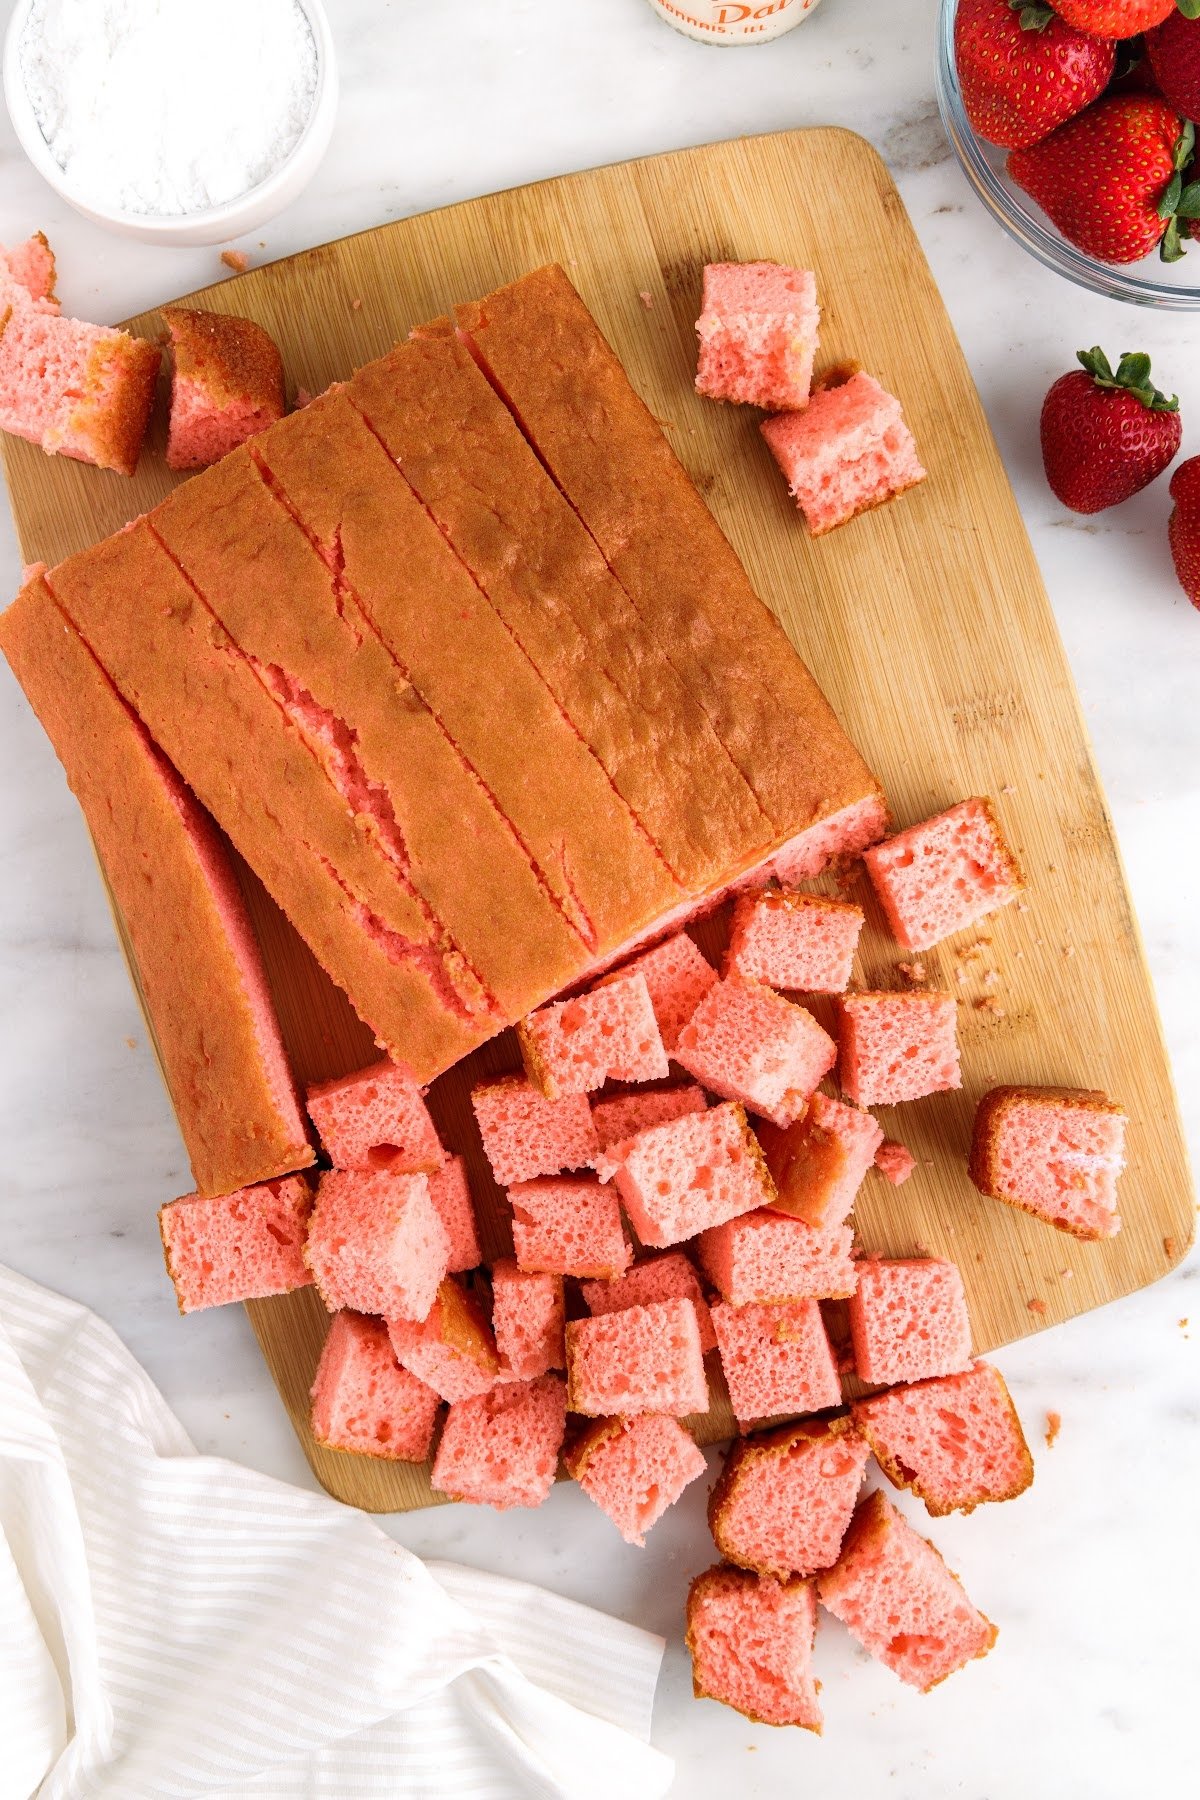 Strawberry sheet cake on cutting board, some sliced into cubes of cake.